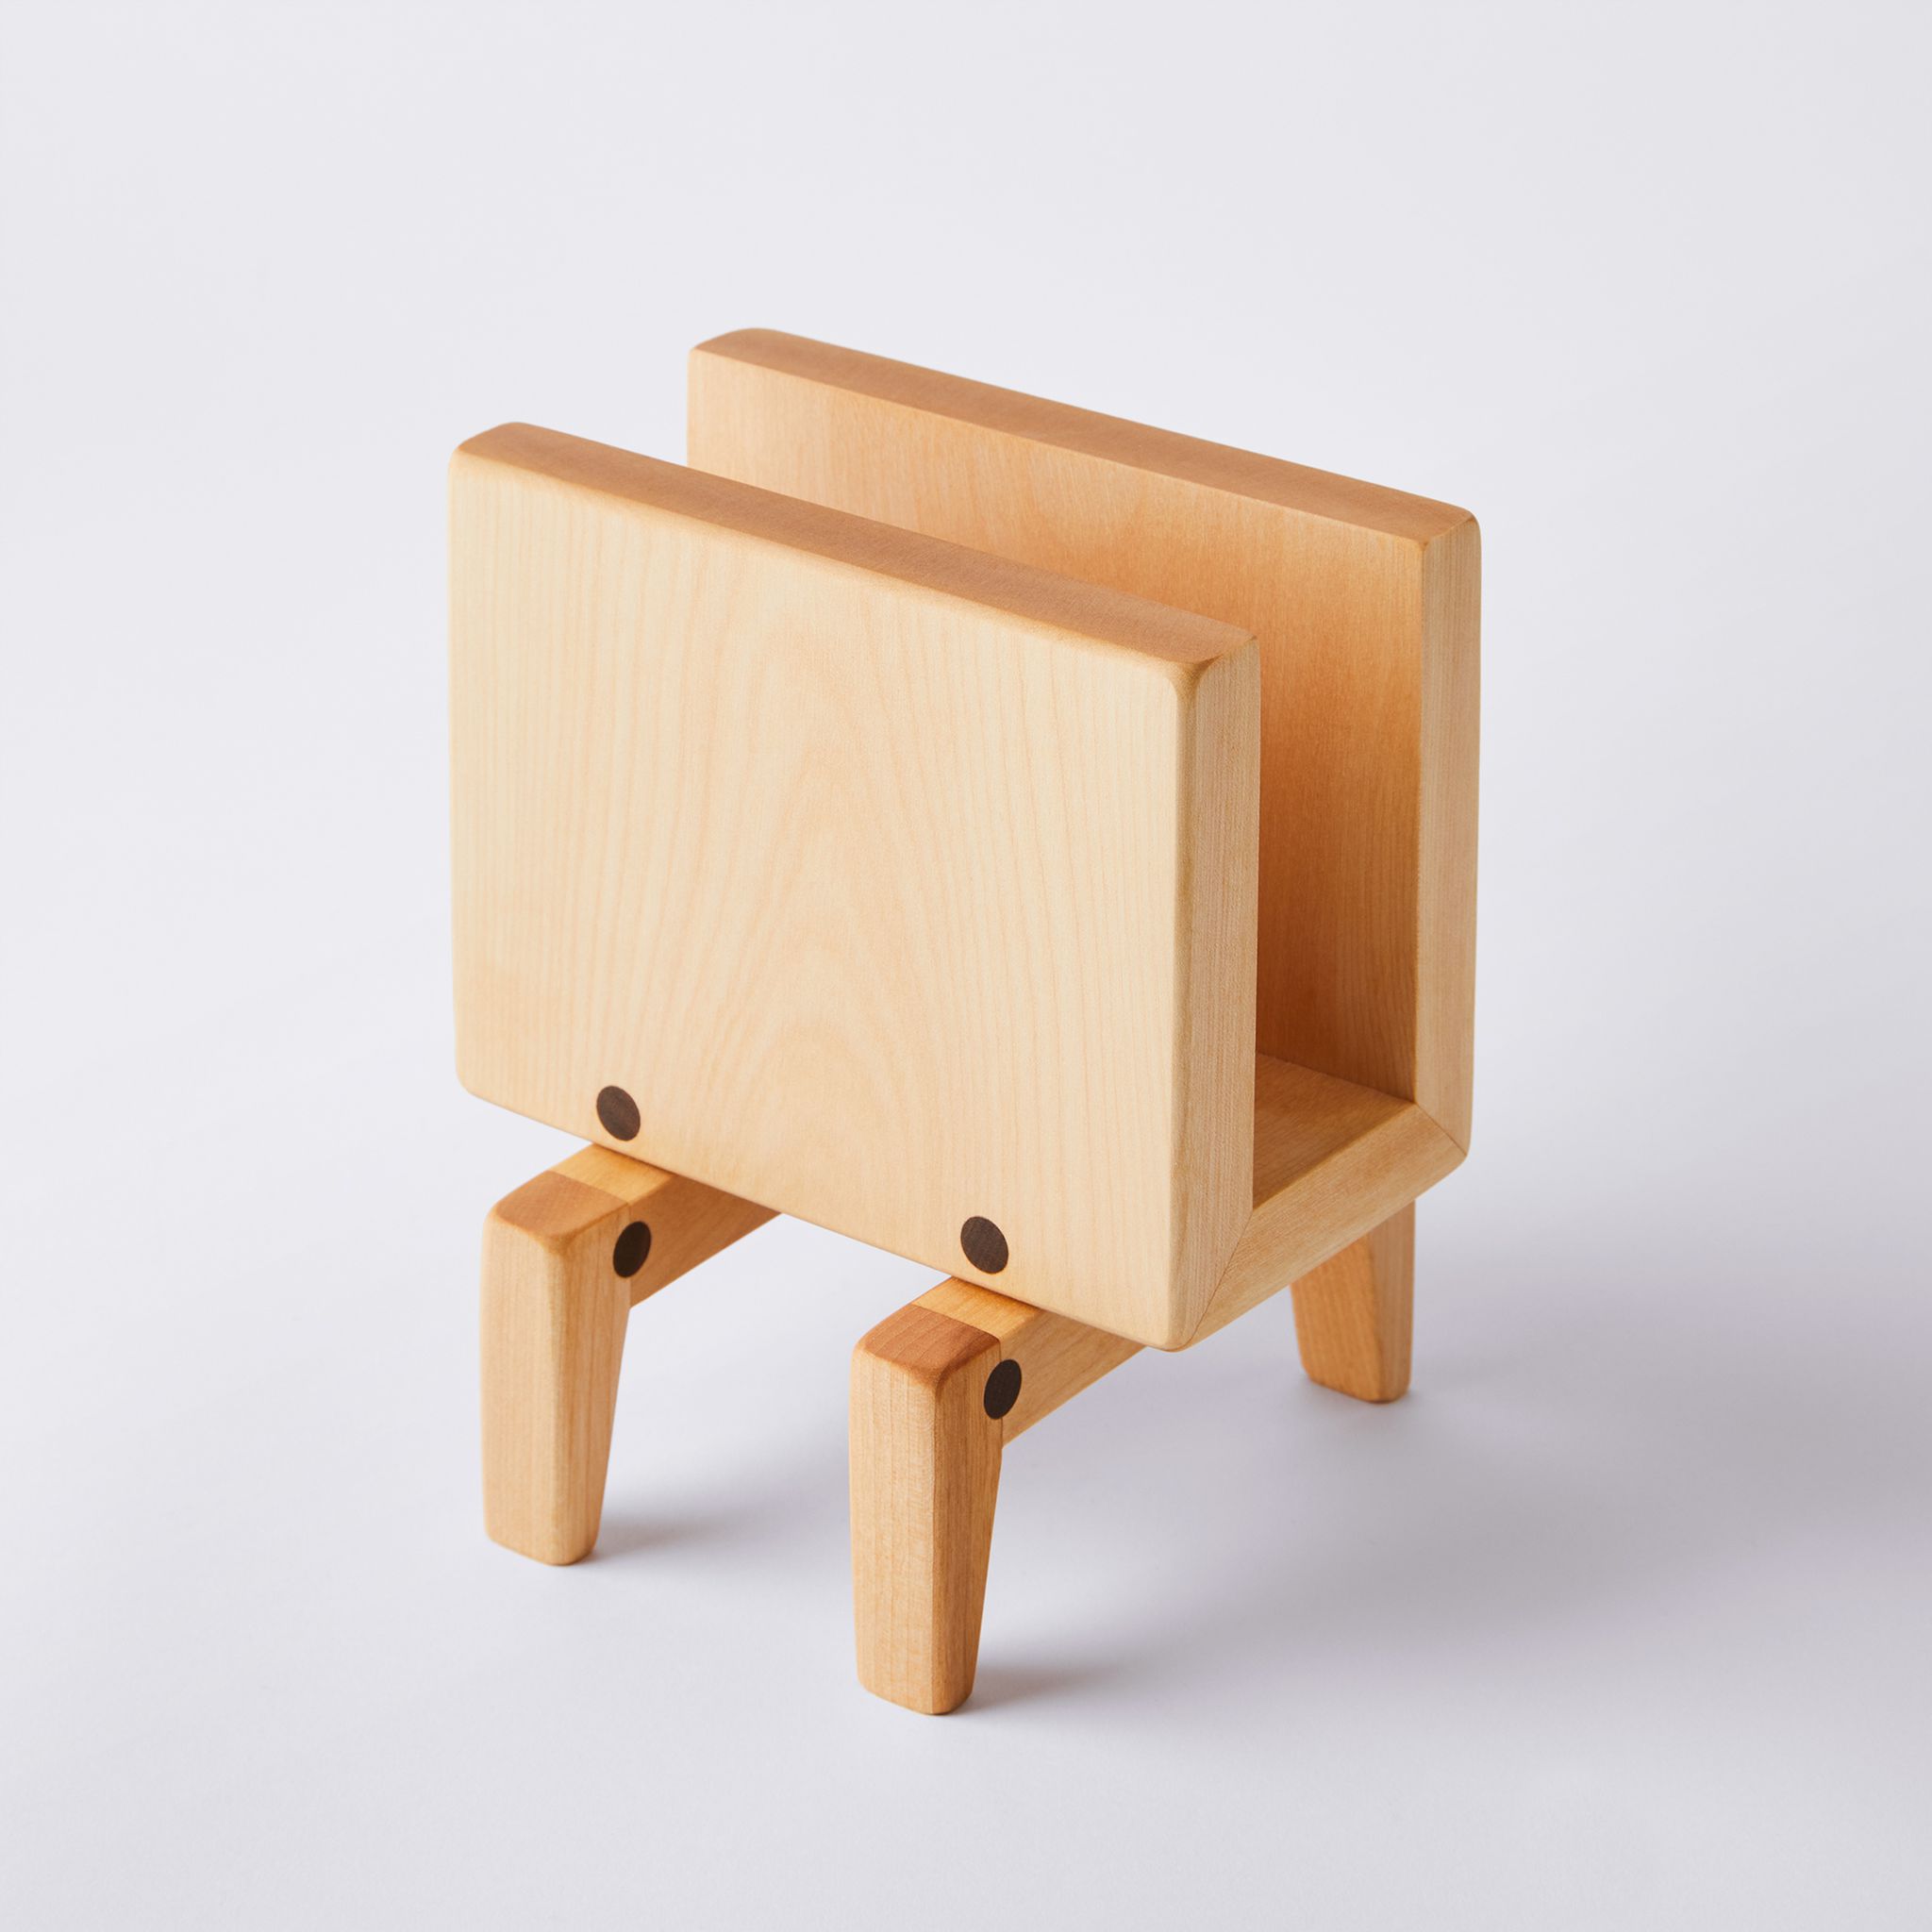 Handcrafted Wood Material Napkin Holder